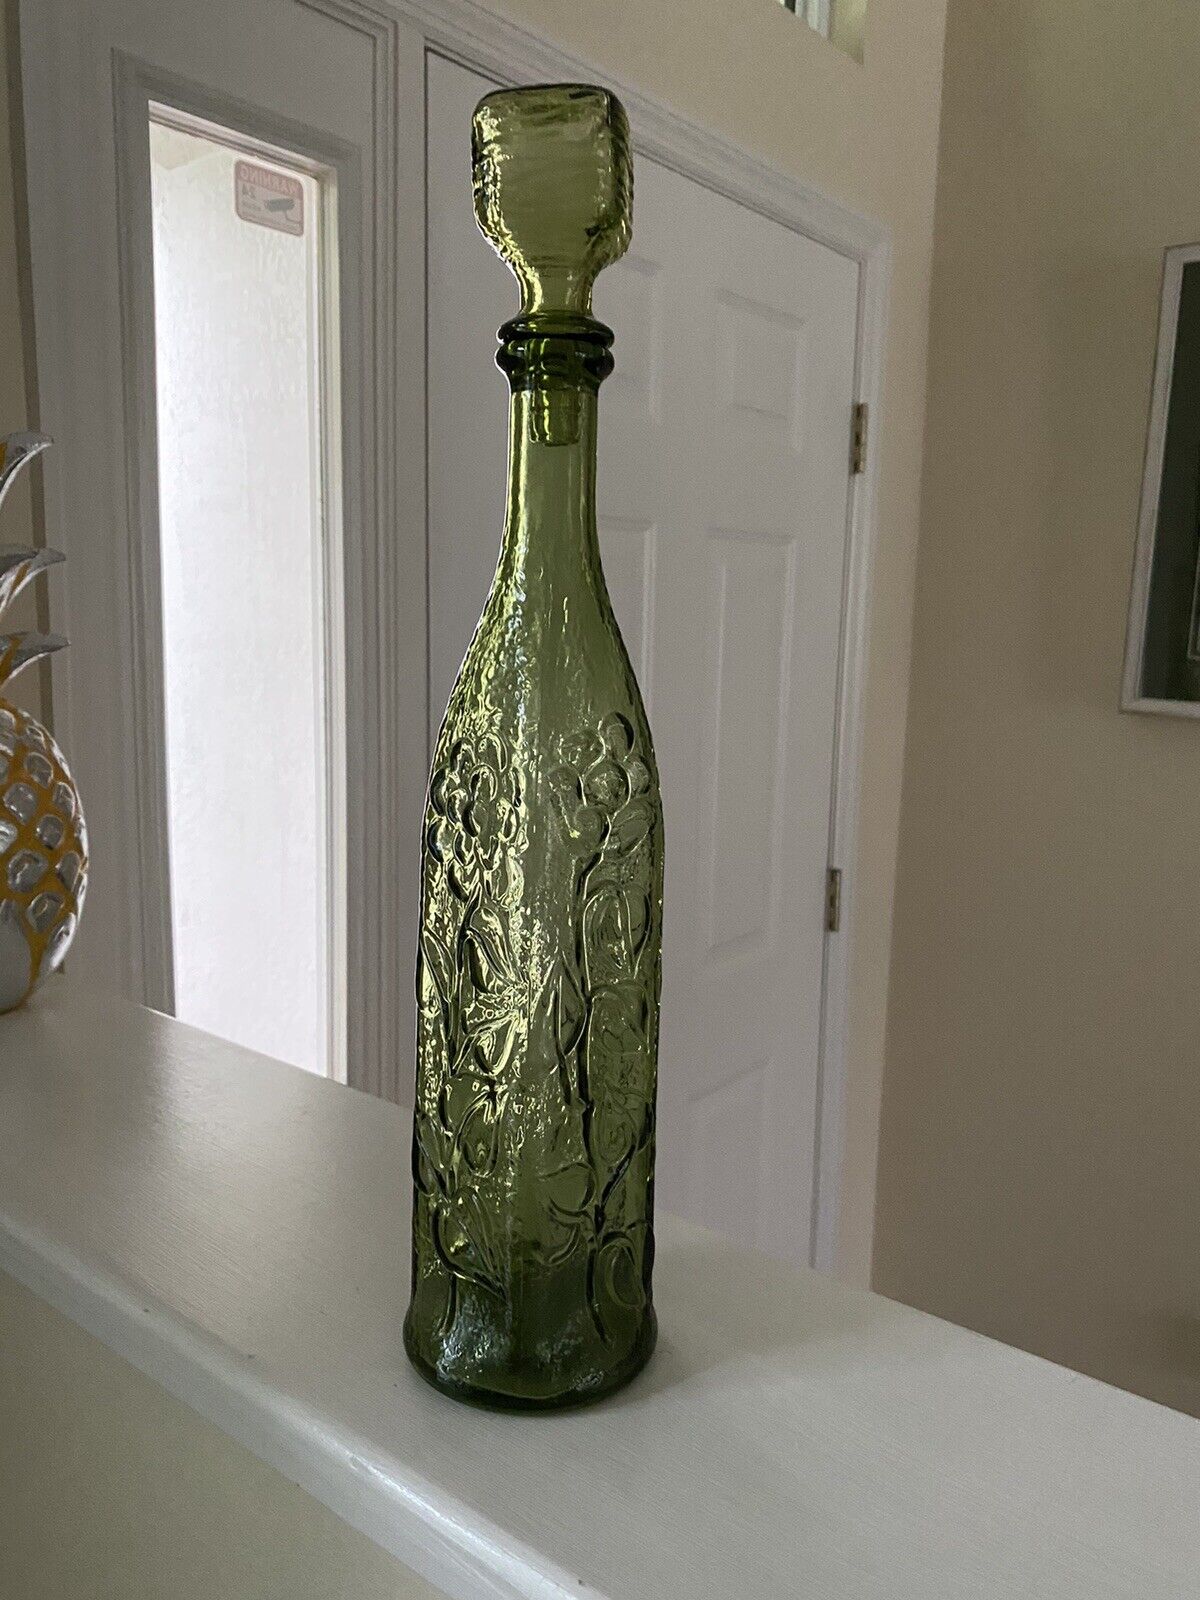 Rossini Empoli MCM VINTAGE ITALY Green GLASS Floral DECANTER BOTTLE 17 Inches